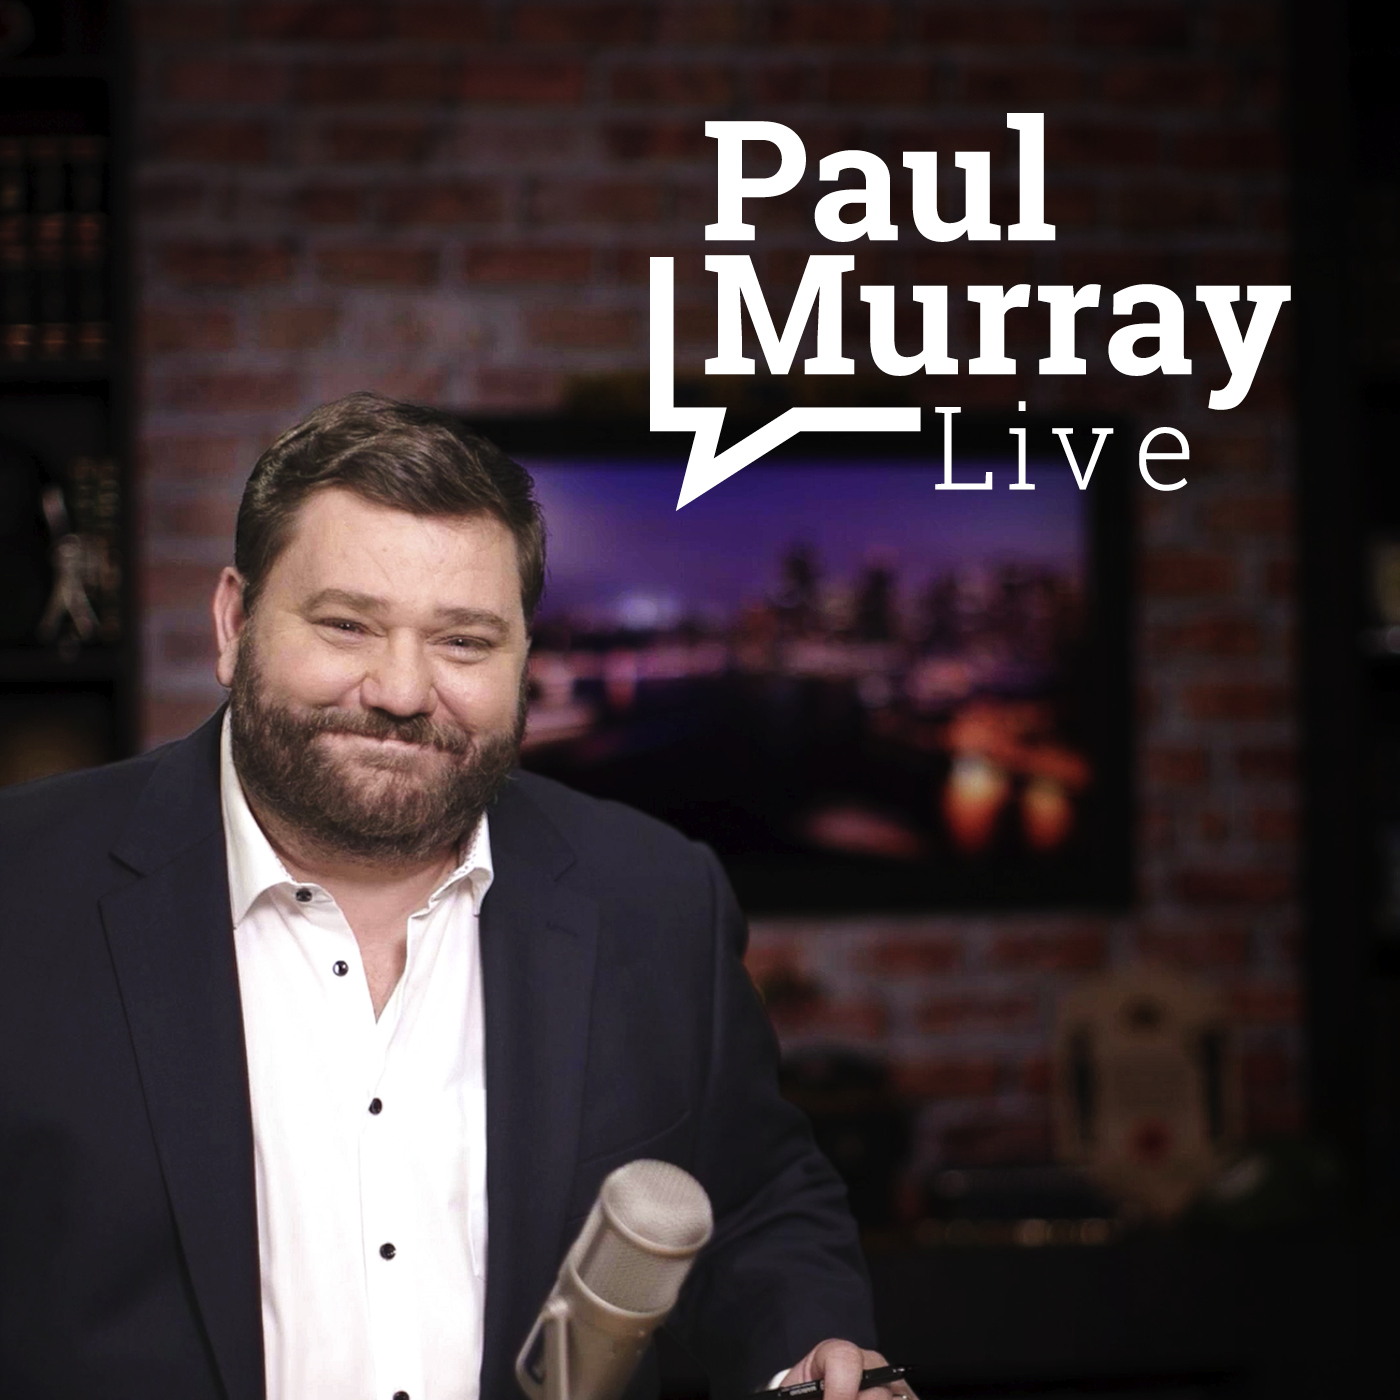 Paul Murray Live, Tuesday 21 March